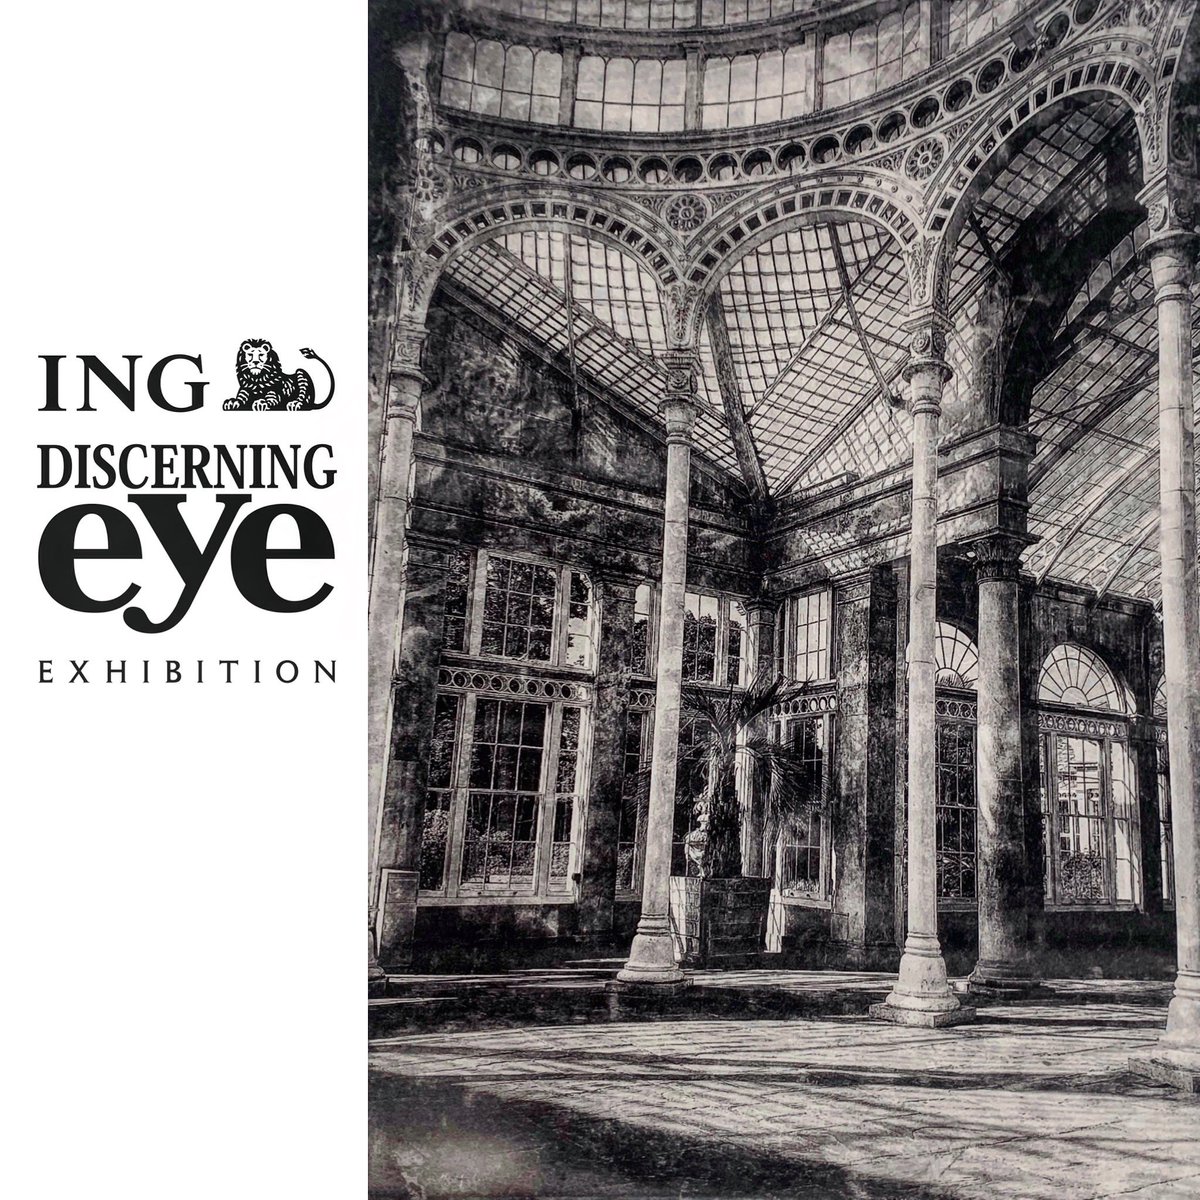 The 2020 ING Discerning Eye exhibition is now live - big thank you to @LondonArtCritic Tabish Khan for selecting my etching ‘The Great Conservatory’ - well done to all the selected artists @ParkerHarrisCo  #INGDiscerningEye  #etching #printmaker #printmaking #syonhouse